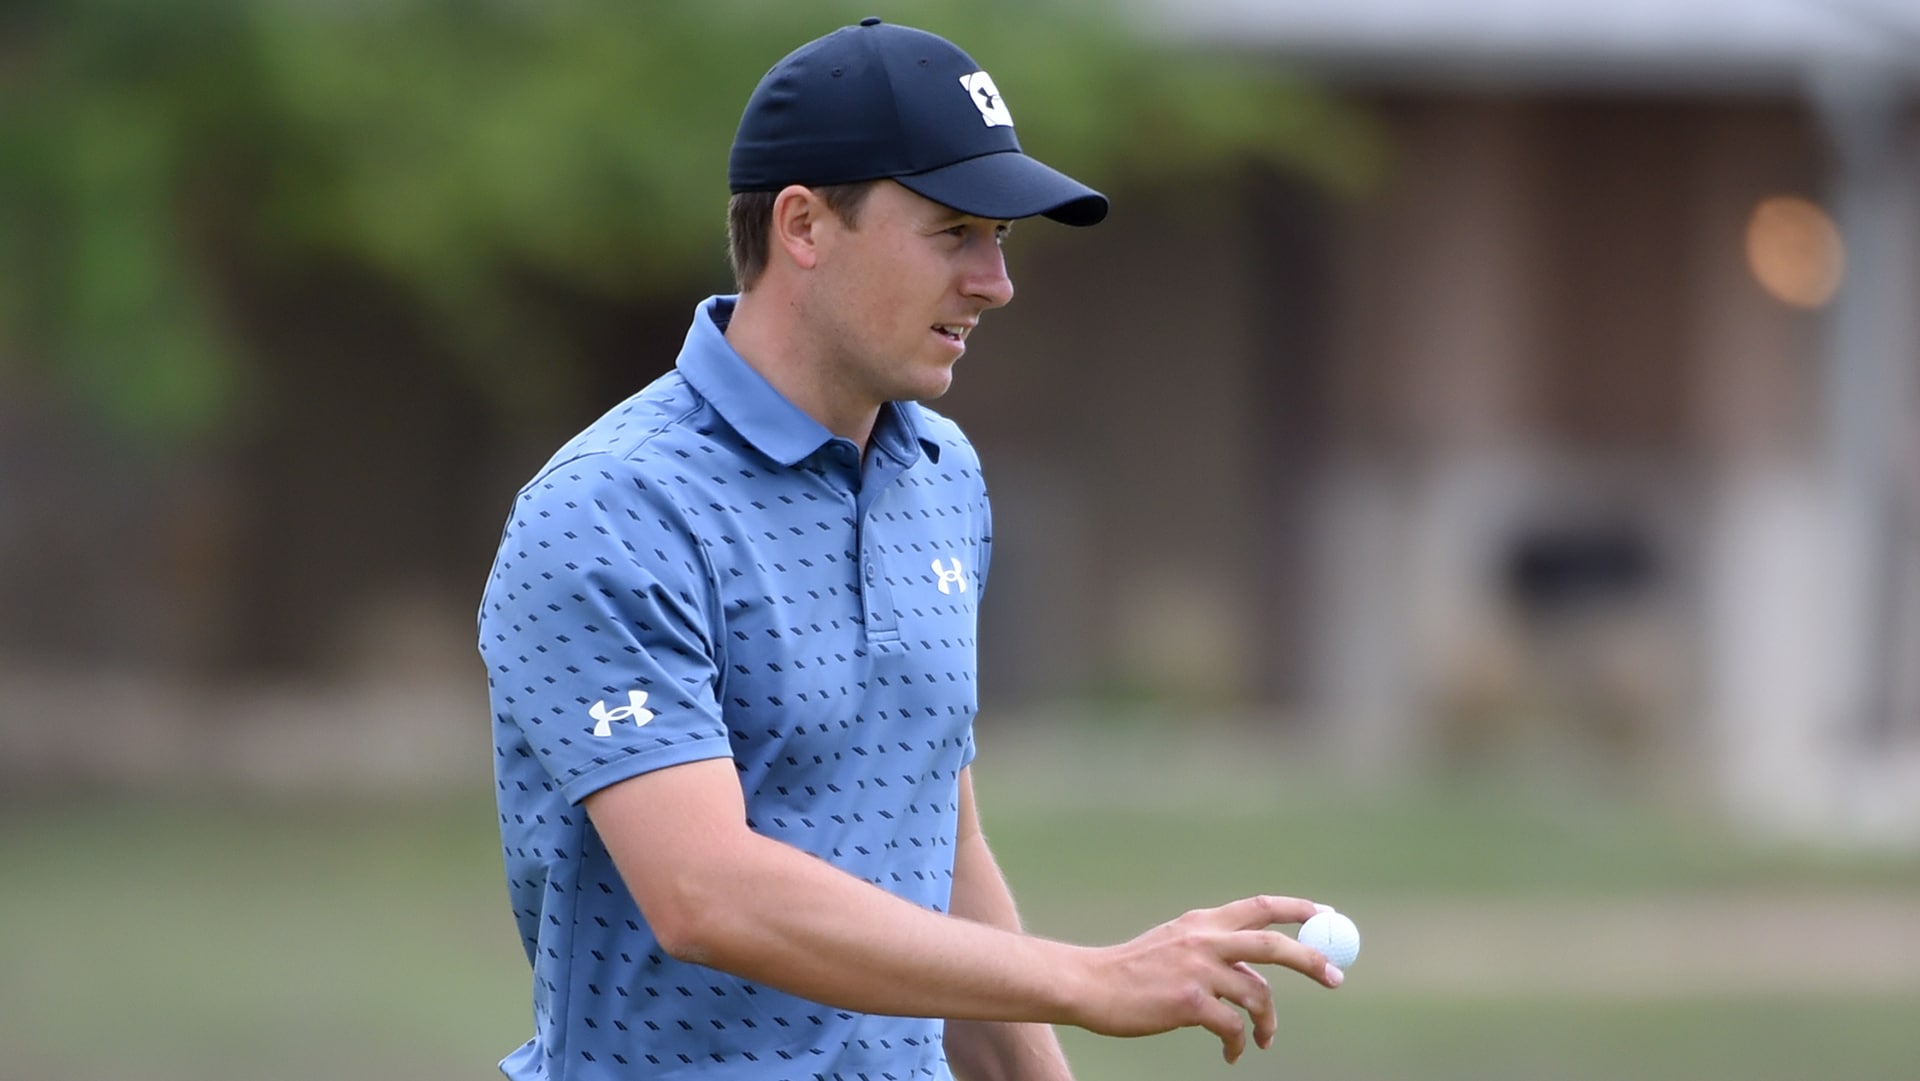 Jordan Spieth ends win drought with Valero Texas Open victory